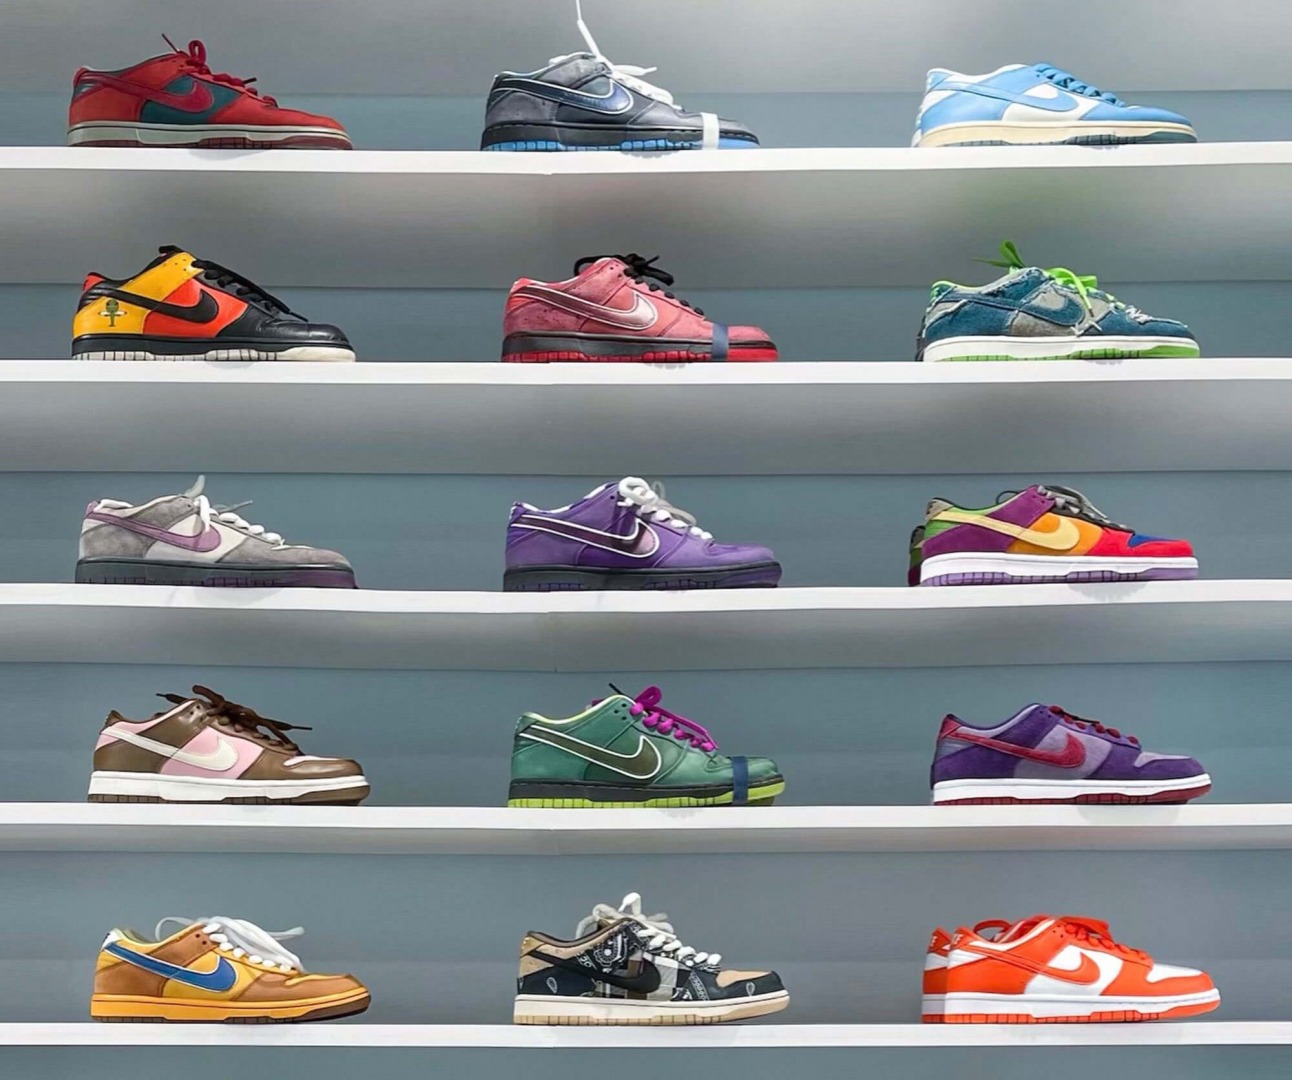 Luxury sneakers: high style and a booming market